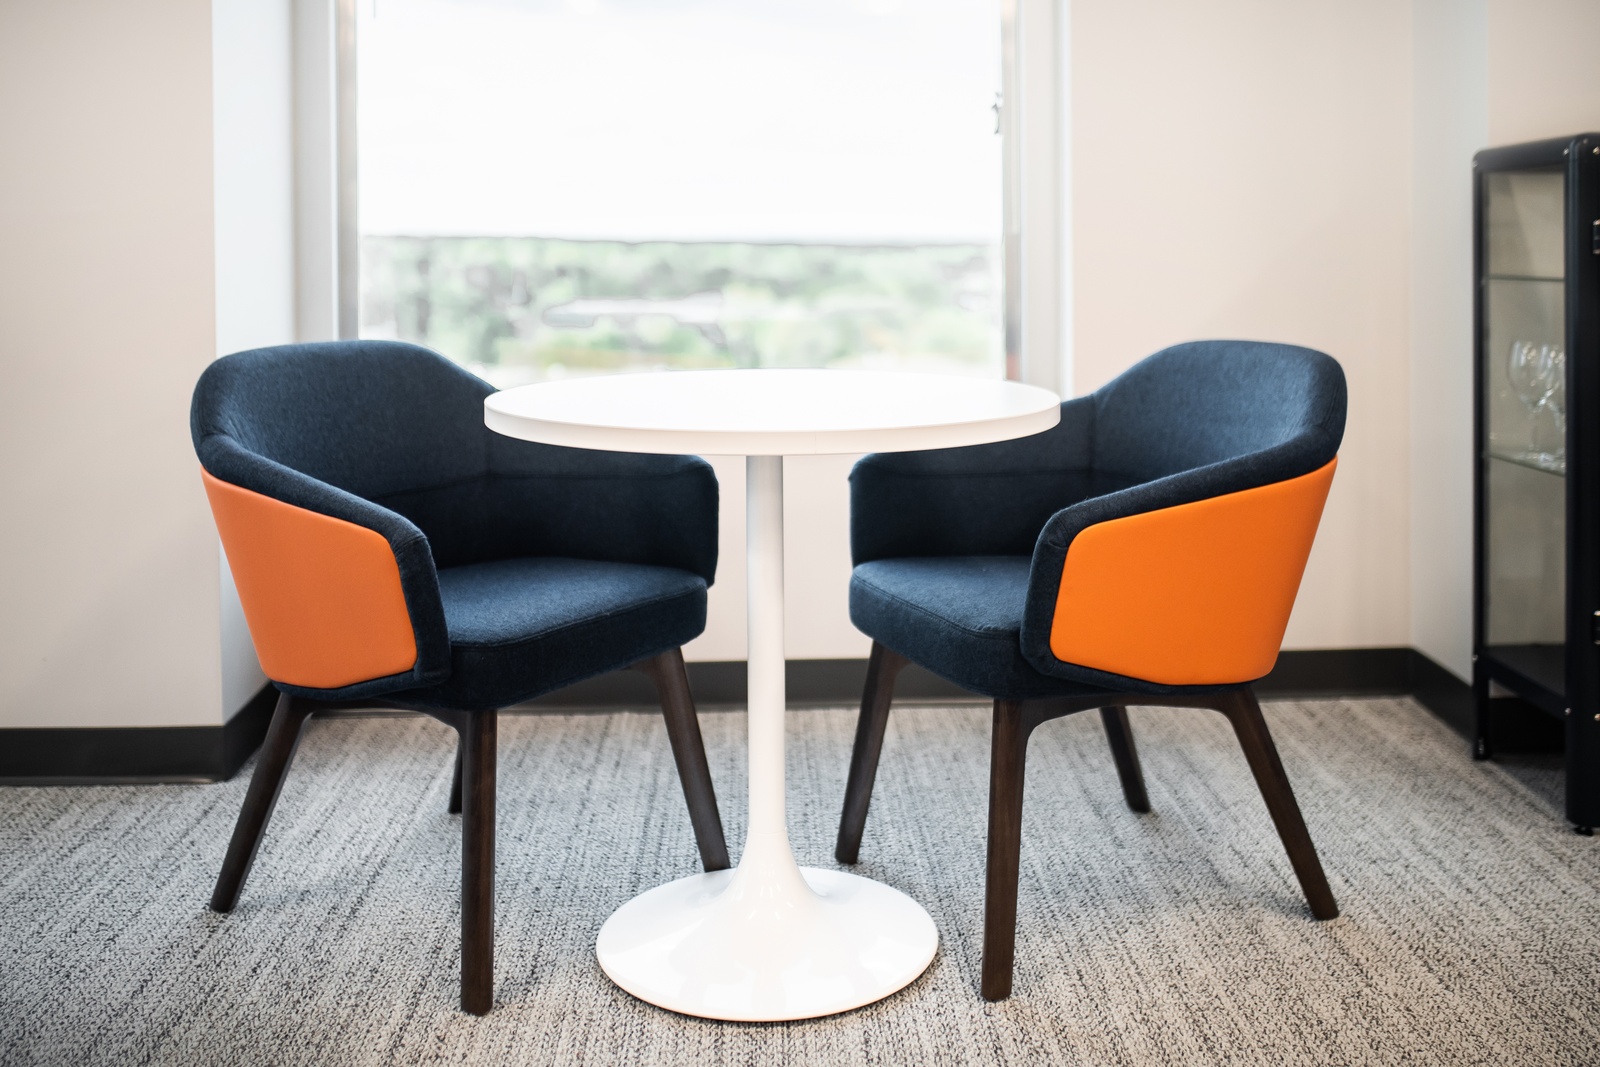 Blue chairs with orange arms